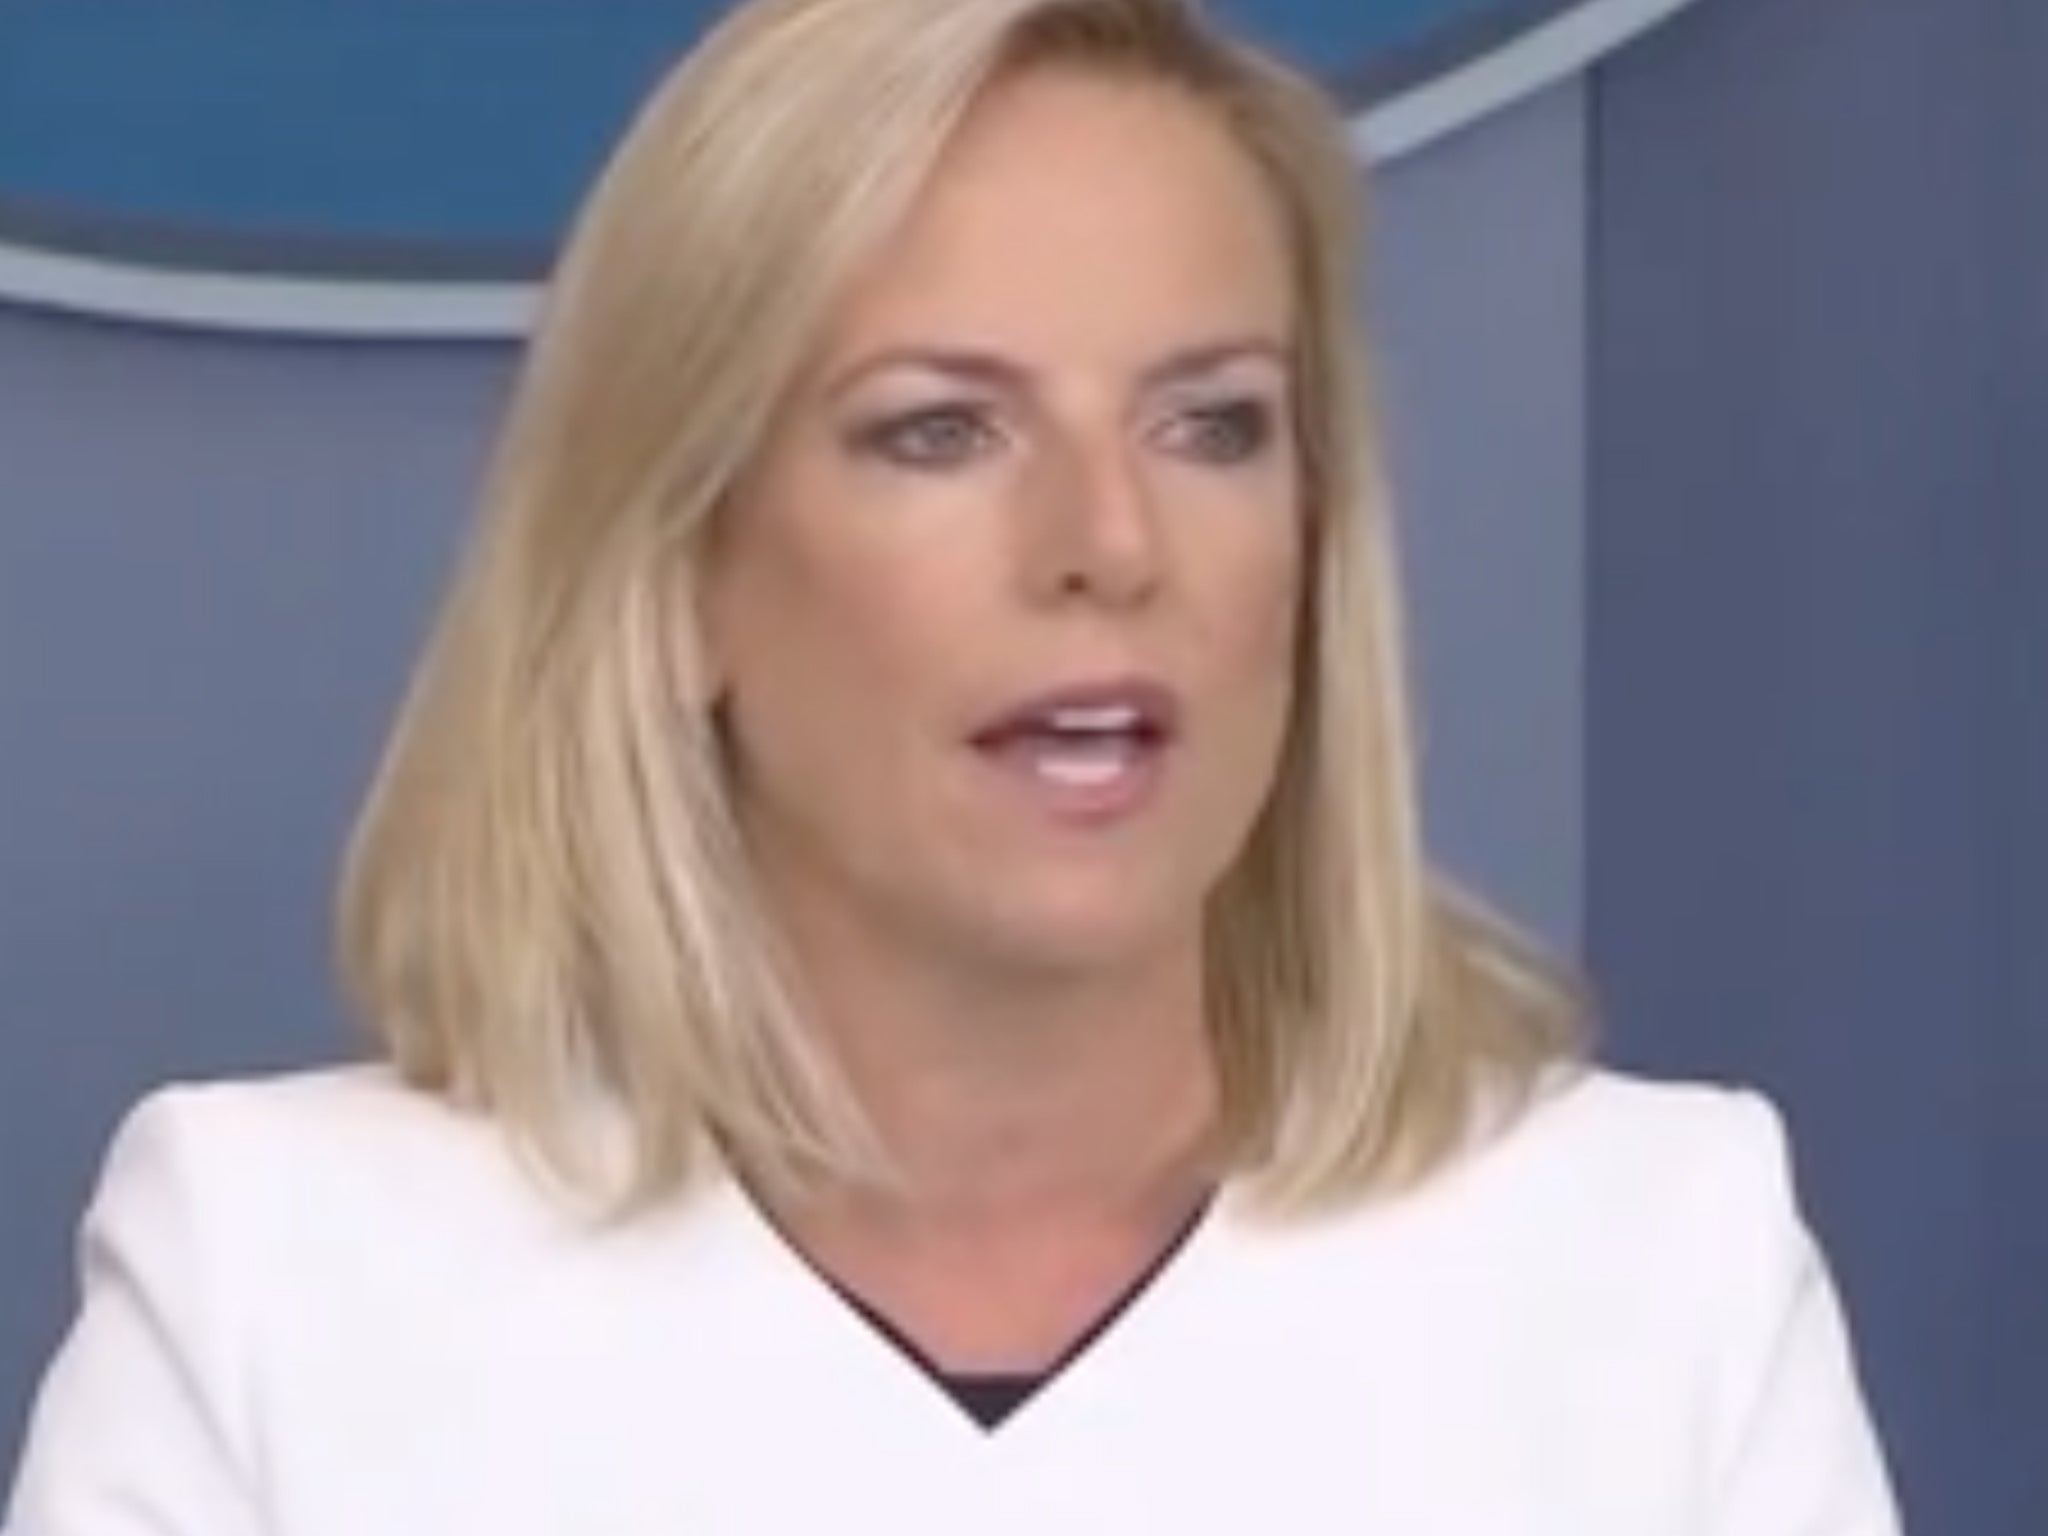 Trump&apos;s homeland security chief warns US &apos;democracy in crosshairs&apos; ahead of midterm elections